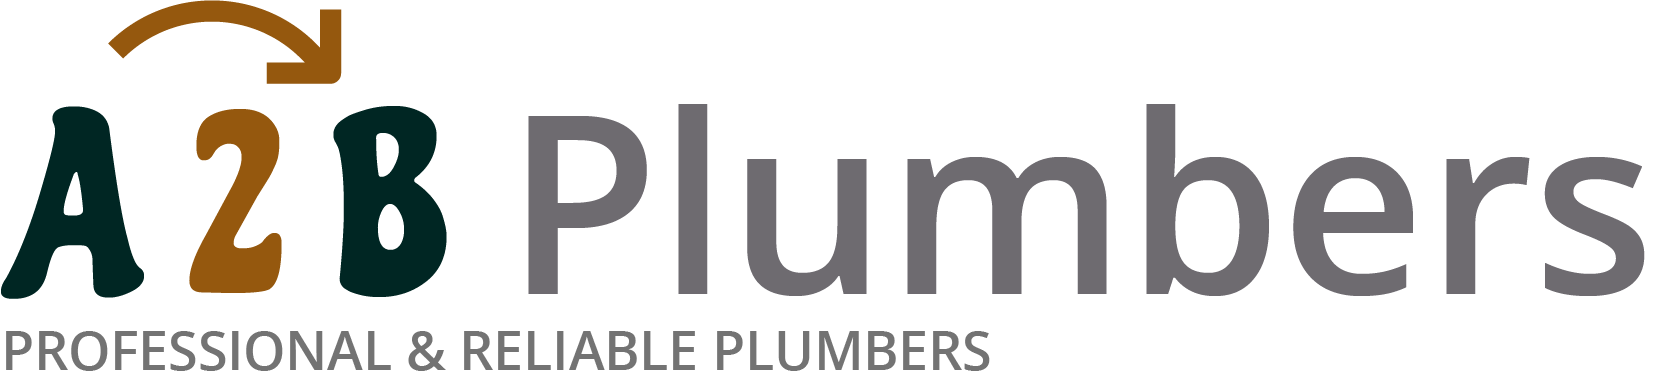 If you need a boiler installed, a radiator repaired or a leaking tap fixed, call us now - we provide services for properties in New Sarum and the local area.